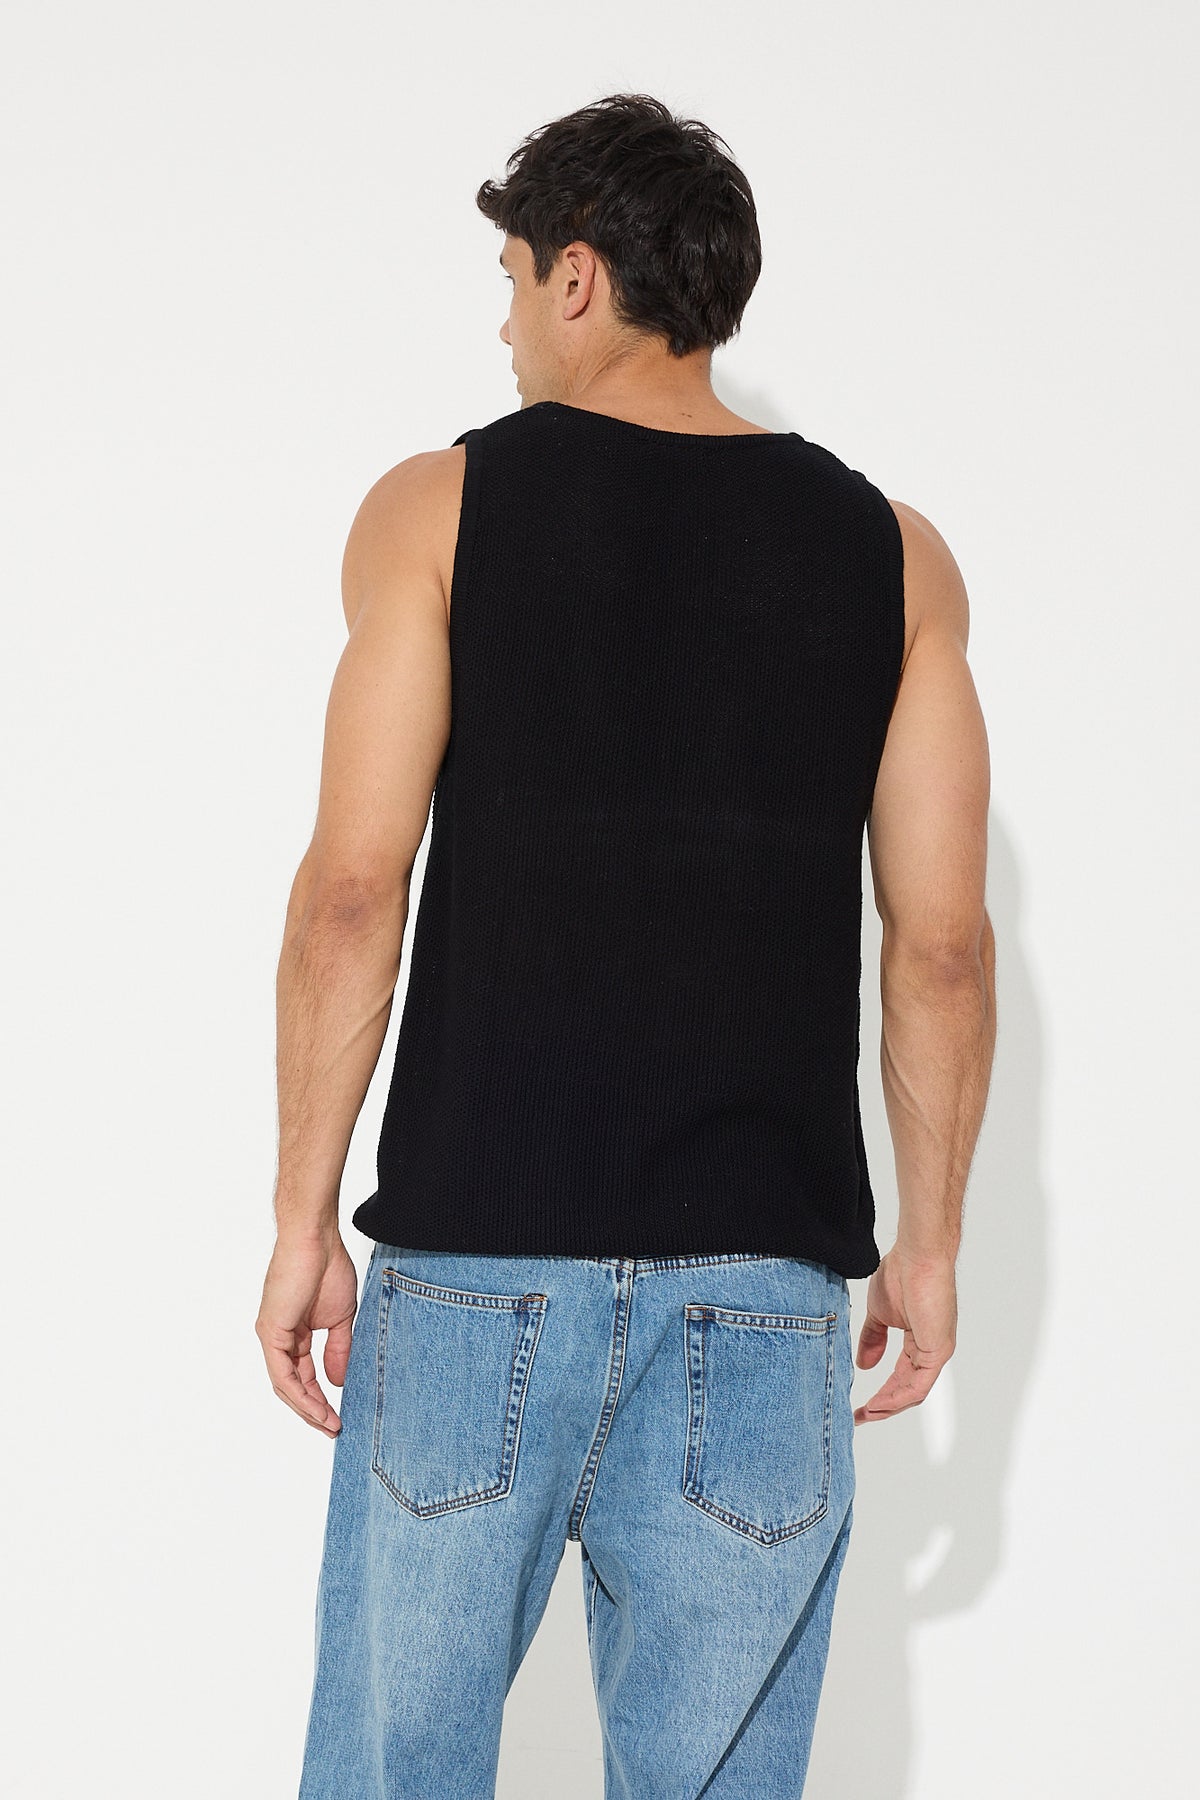 NTH Knitted Tank Black - FINAL SALE